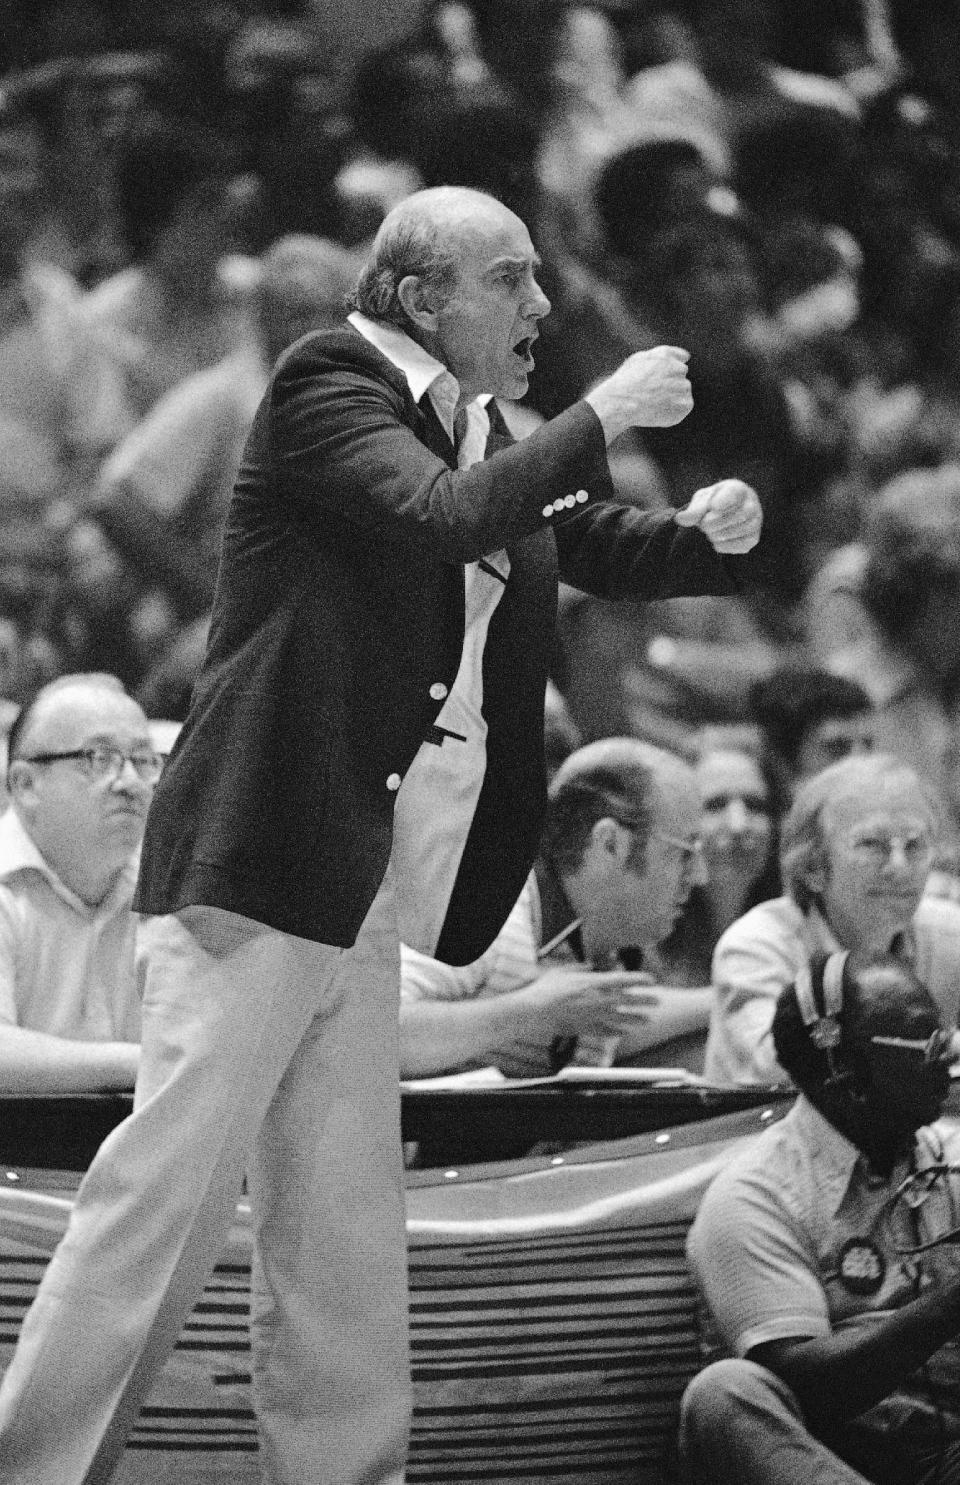 FILE - In this May 22, 1977, file photo, Portland Trail Blazers head coach Jack Ramsay signals to his team late in an NBA basketball game against the 76ers in Philadelphia. Ramsay, a Hall of Fame coach who led the Portland Trail Blazers to the 1977 NBA championship before he became one of the league's most respected broadcasters, has died following a long battle with cancer. He was 89. (AP Photo/File)